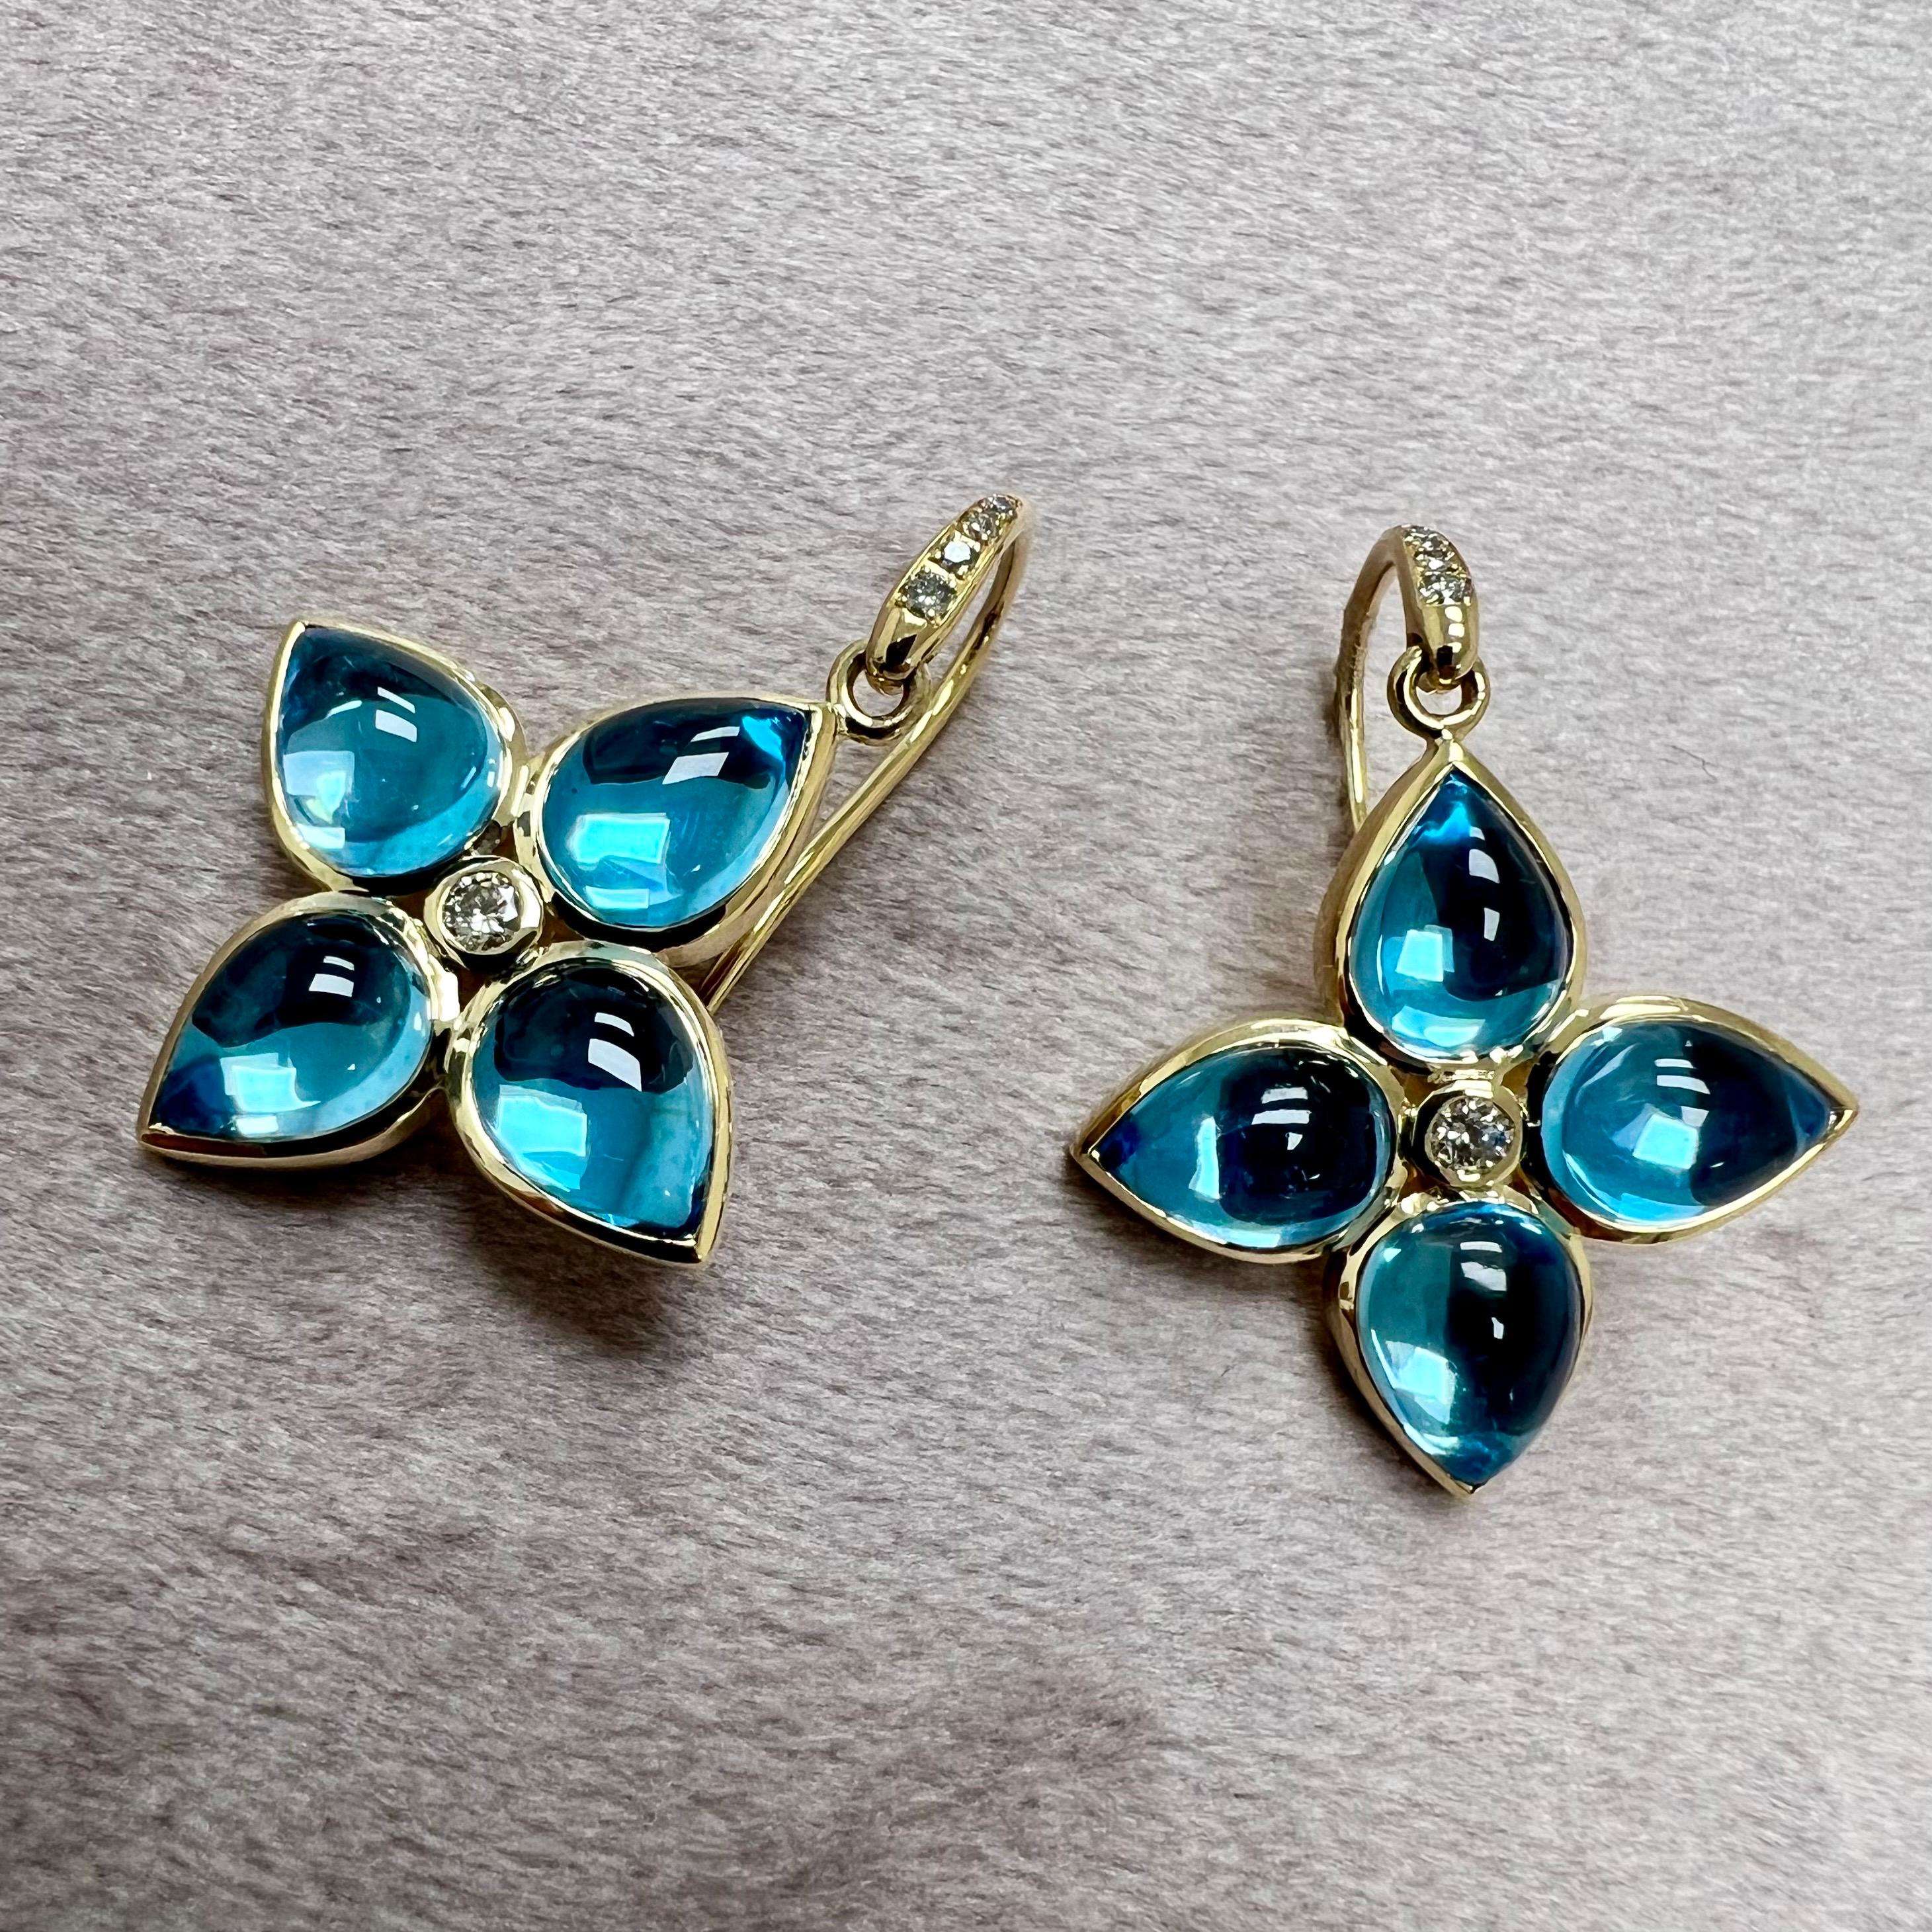 Created in 18 karat yellow gold
Blue Topaz 12.50 carats approx.
Diamonds 0.14 carat approx.
French wire for pierced ears
Limited Edition


About the Designers

Drawing inspiration from little things, Dharmesh & Namrata Kothari have created an